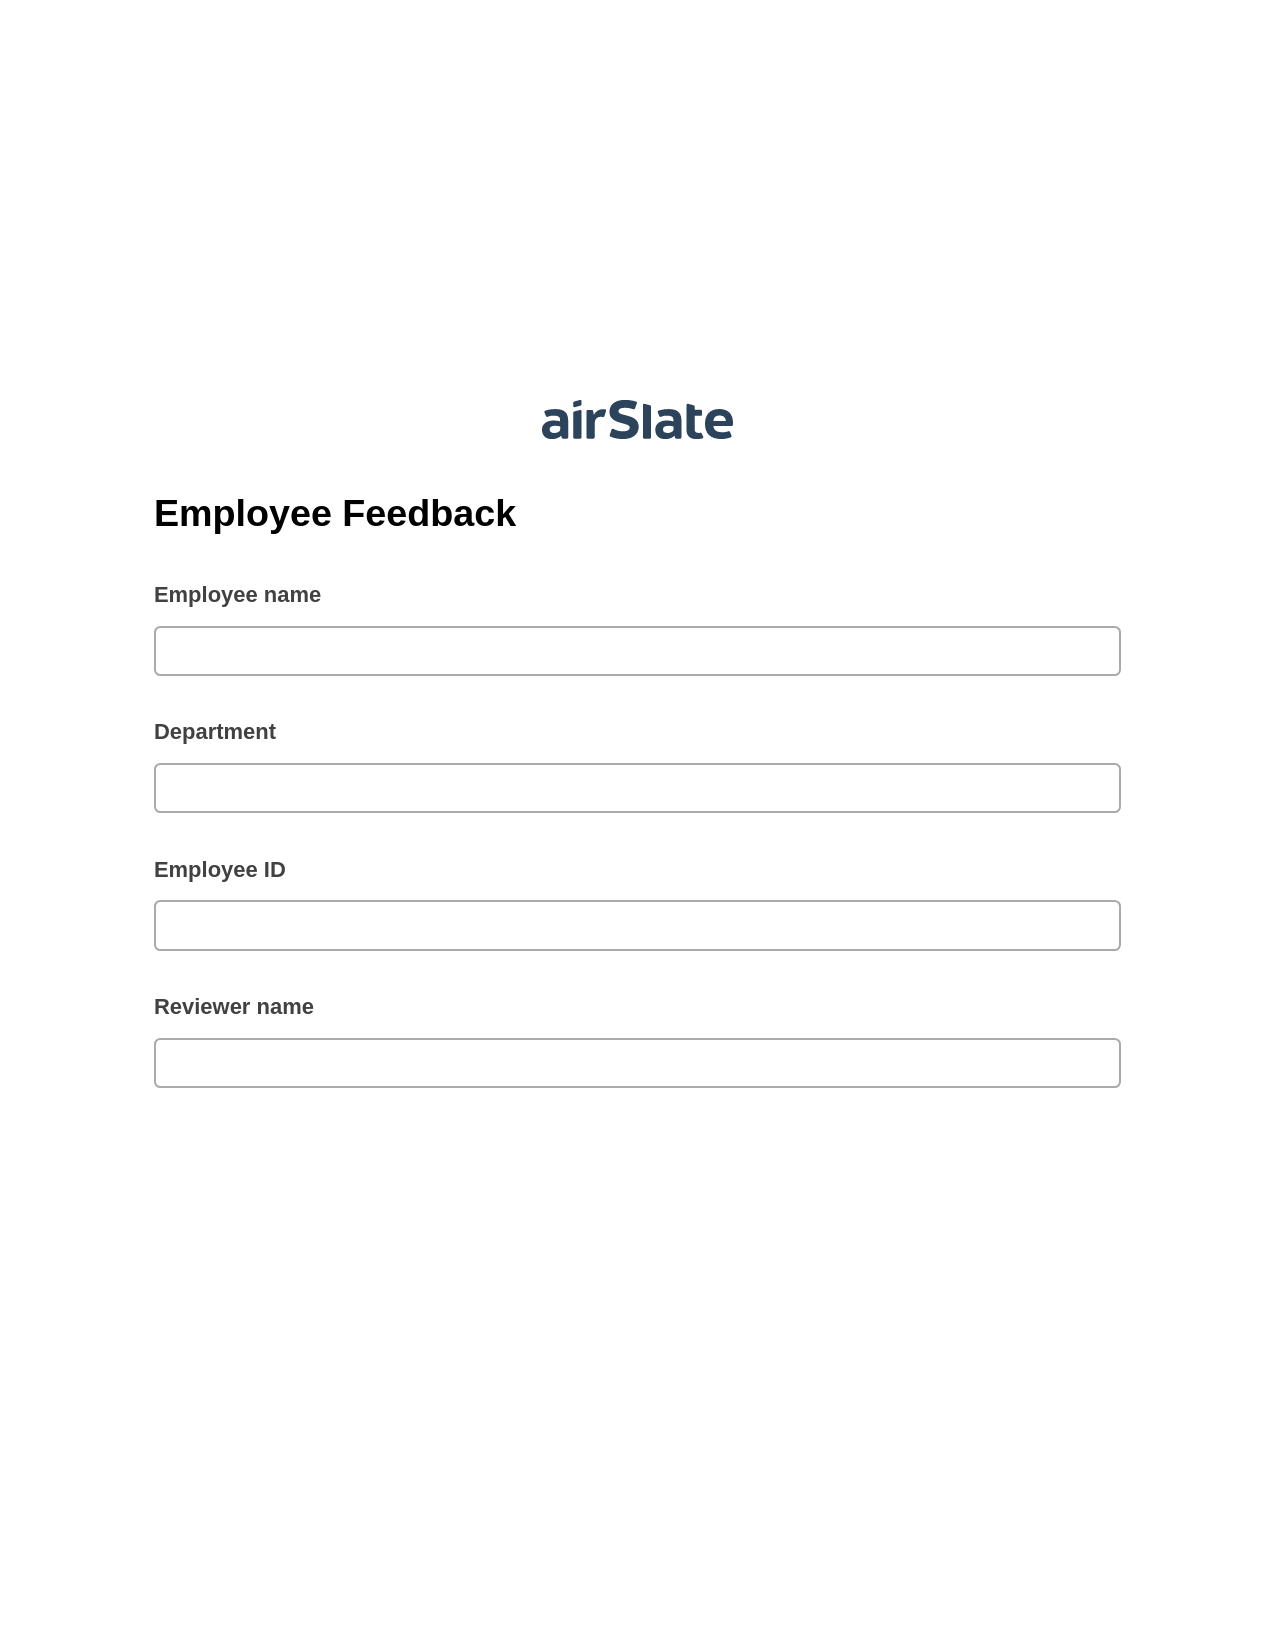 Multirole Employee Feedback Pre-fill from Google Sheet Dropdown Options Bot, Reminder Bot, Export to NetSuite Record Bot